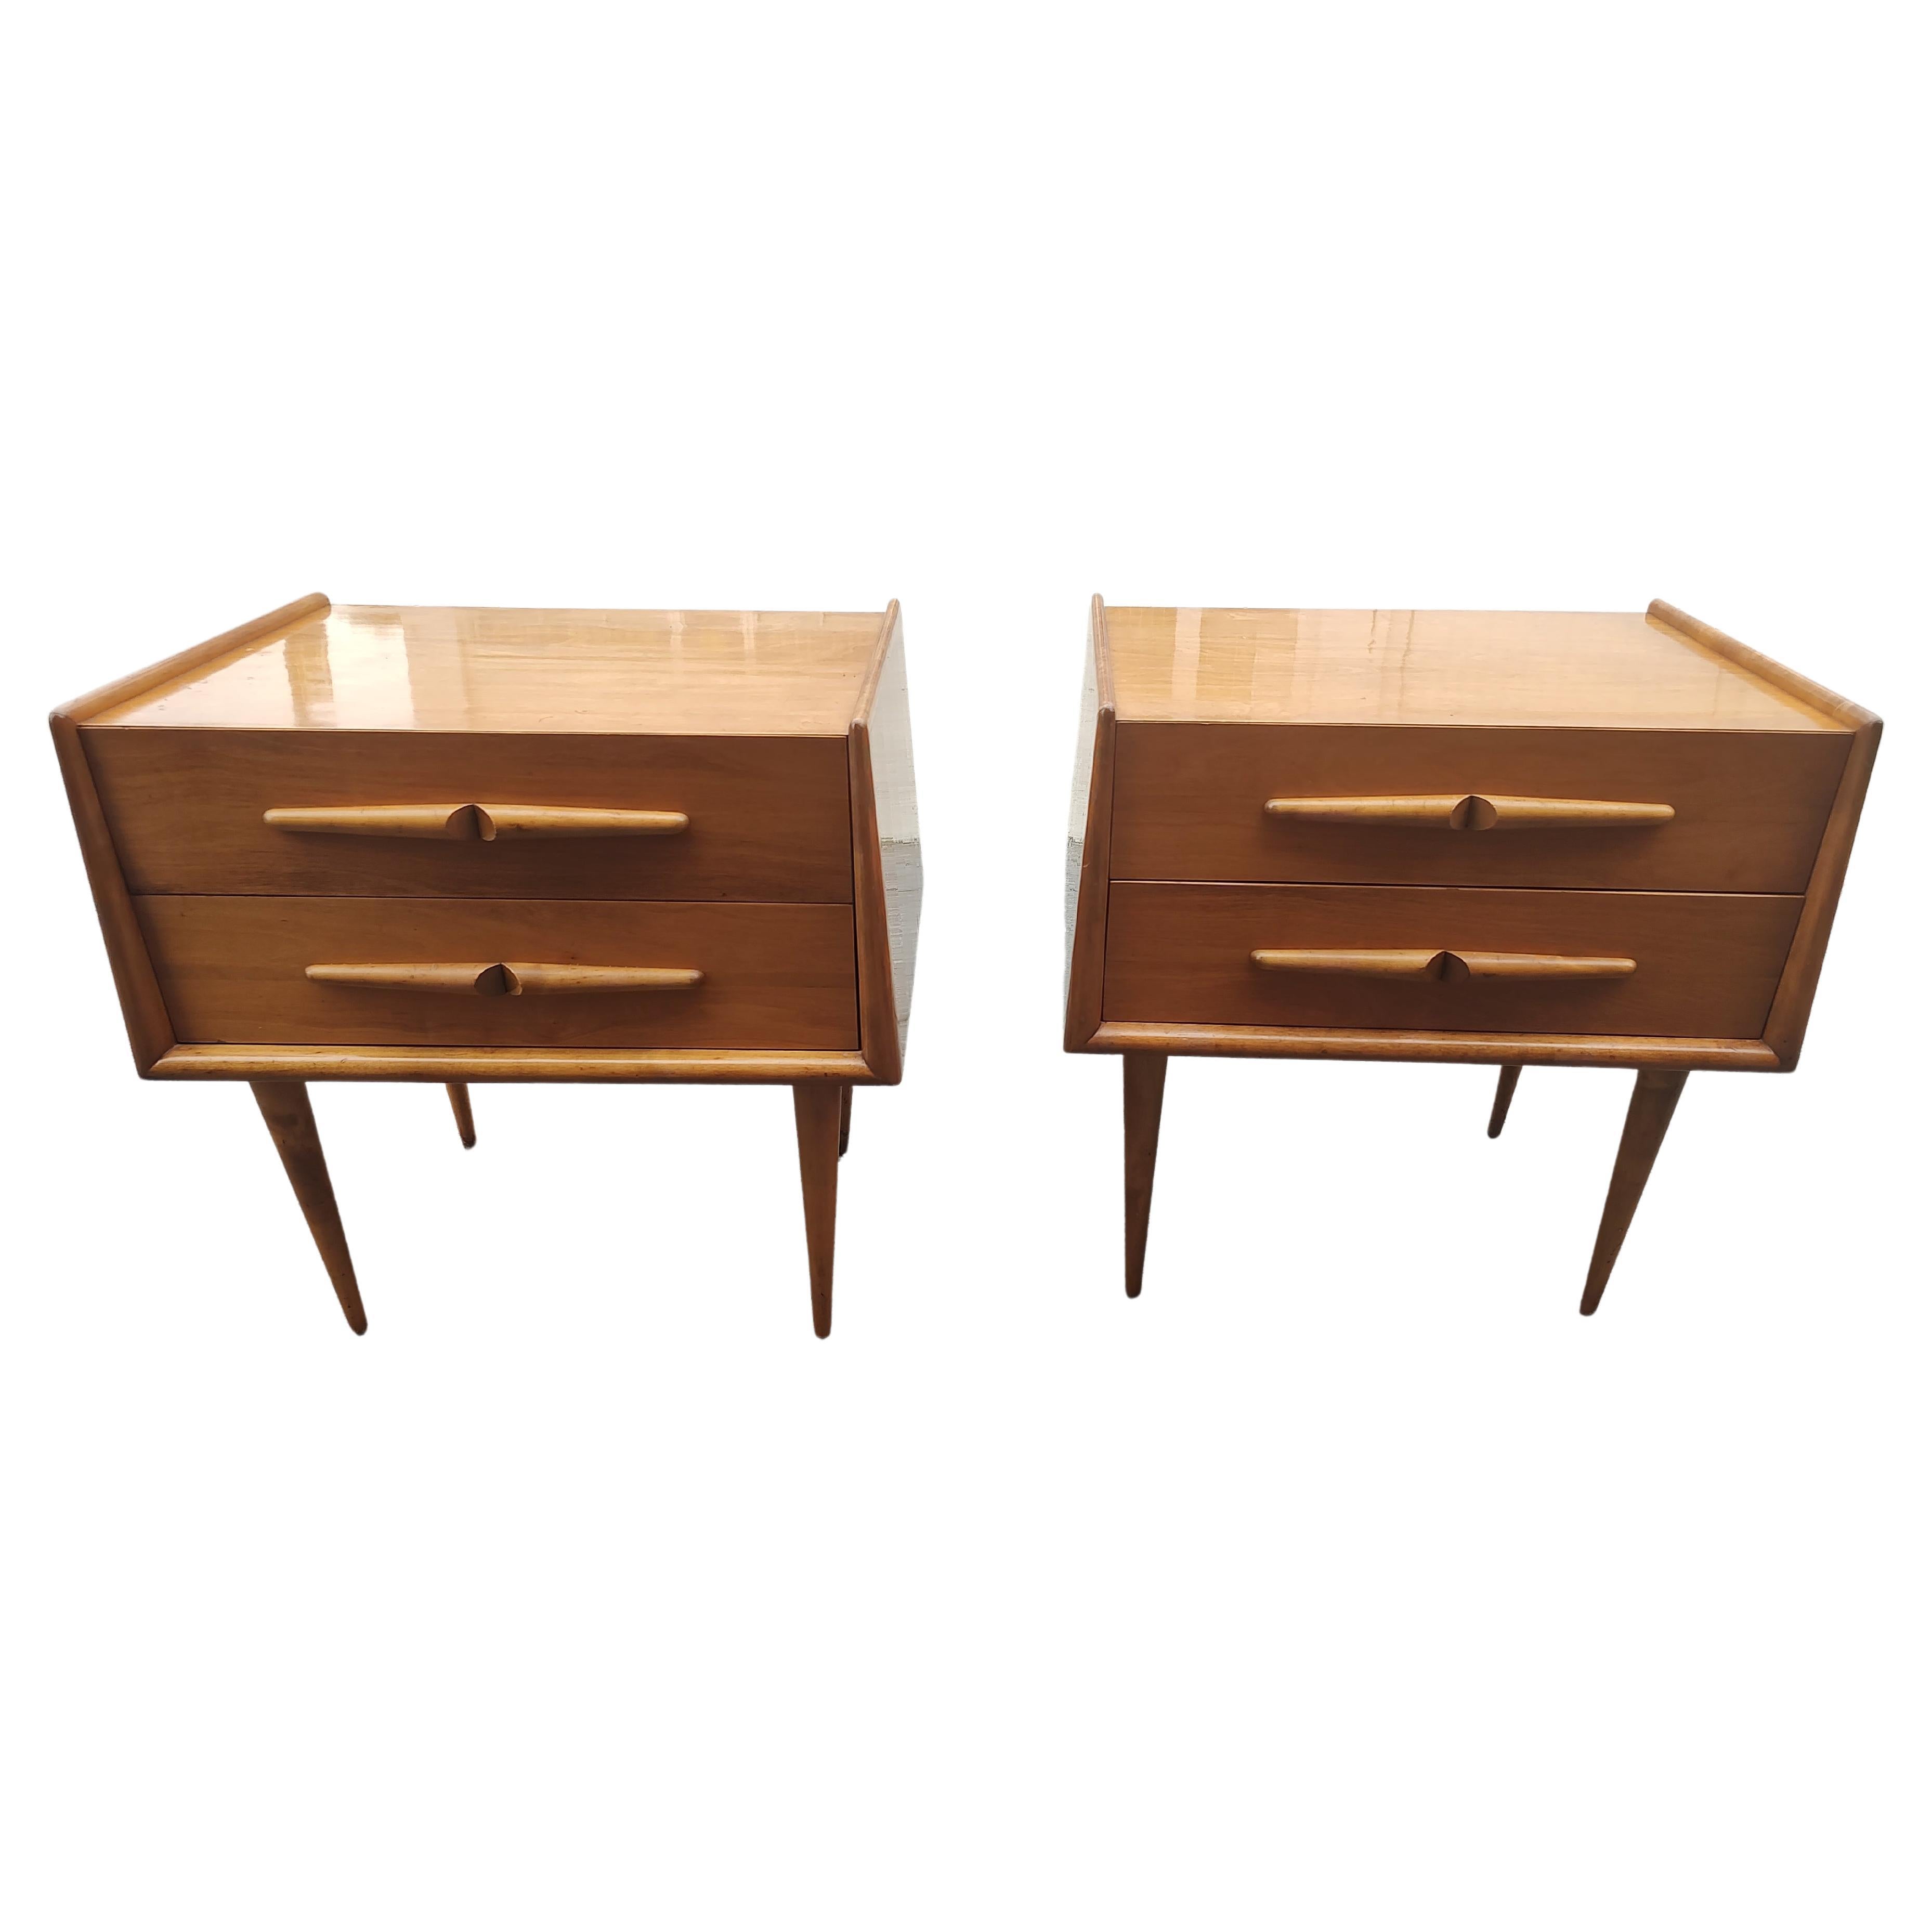 Pair of Mid Century Modern Night Stands in Birch by Edmond Spence Sweden C1953 In Good Condition For Sale In Port Jervis, NY